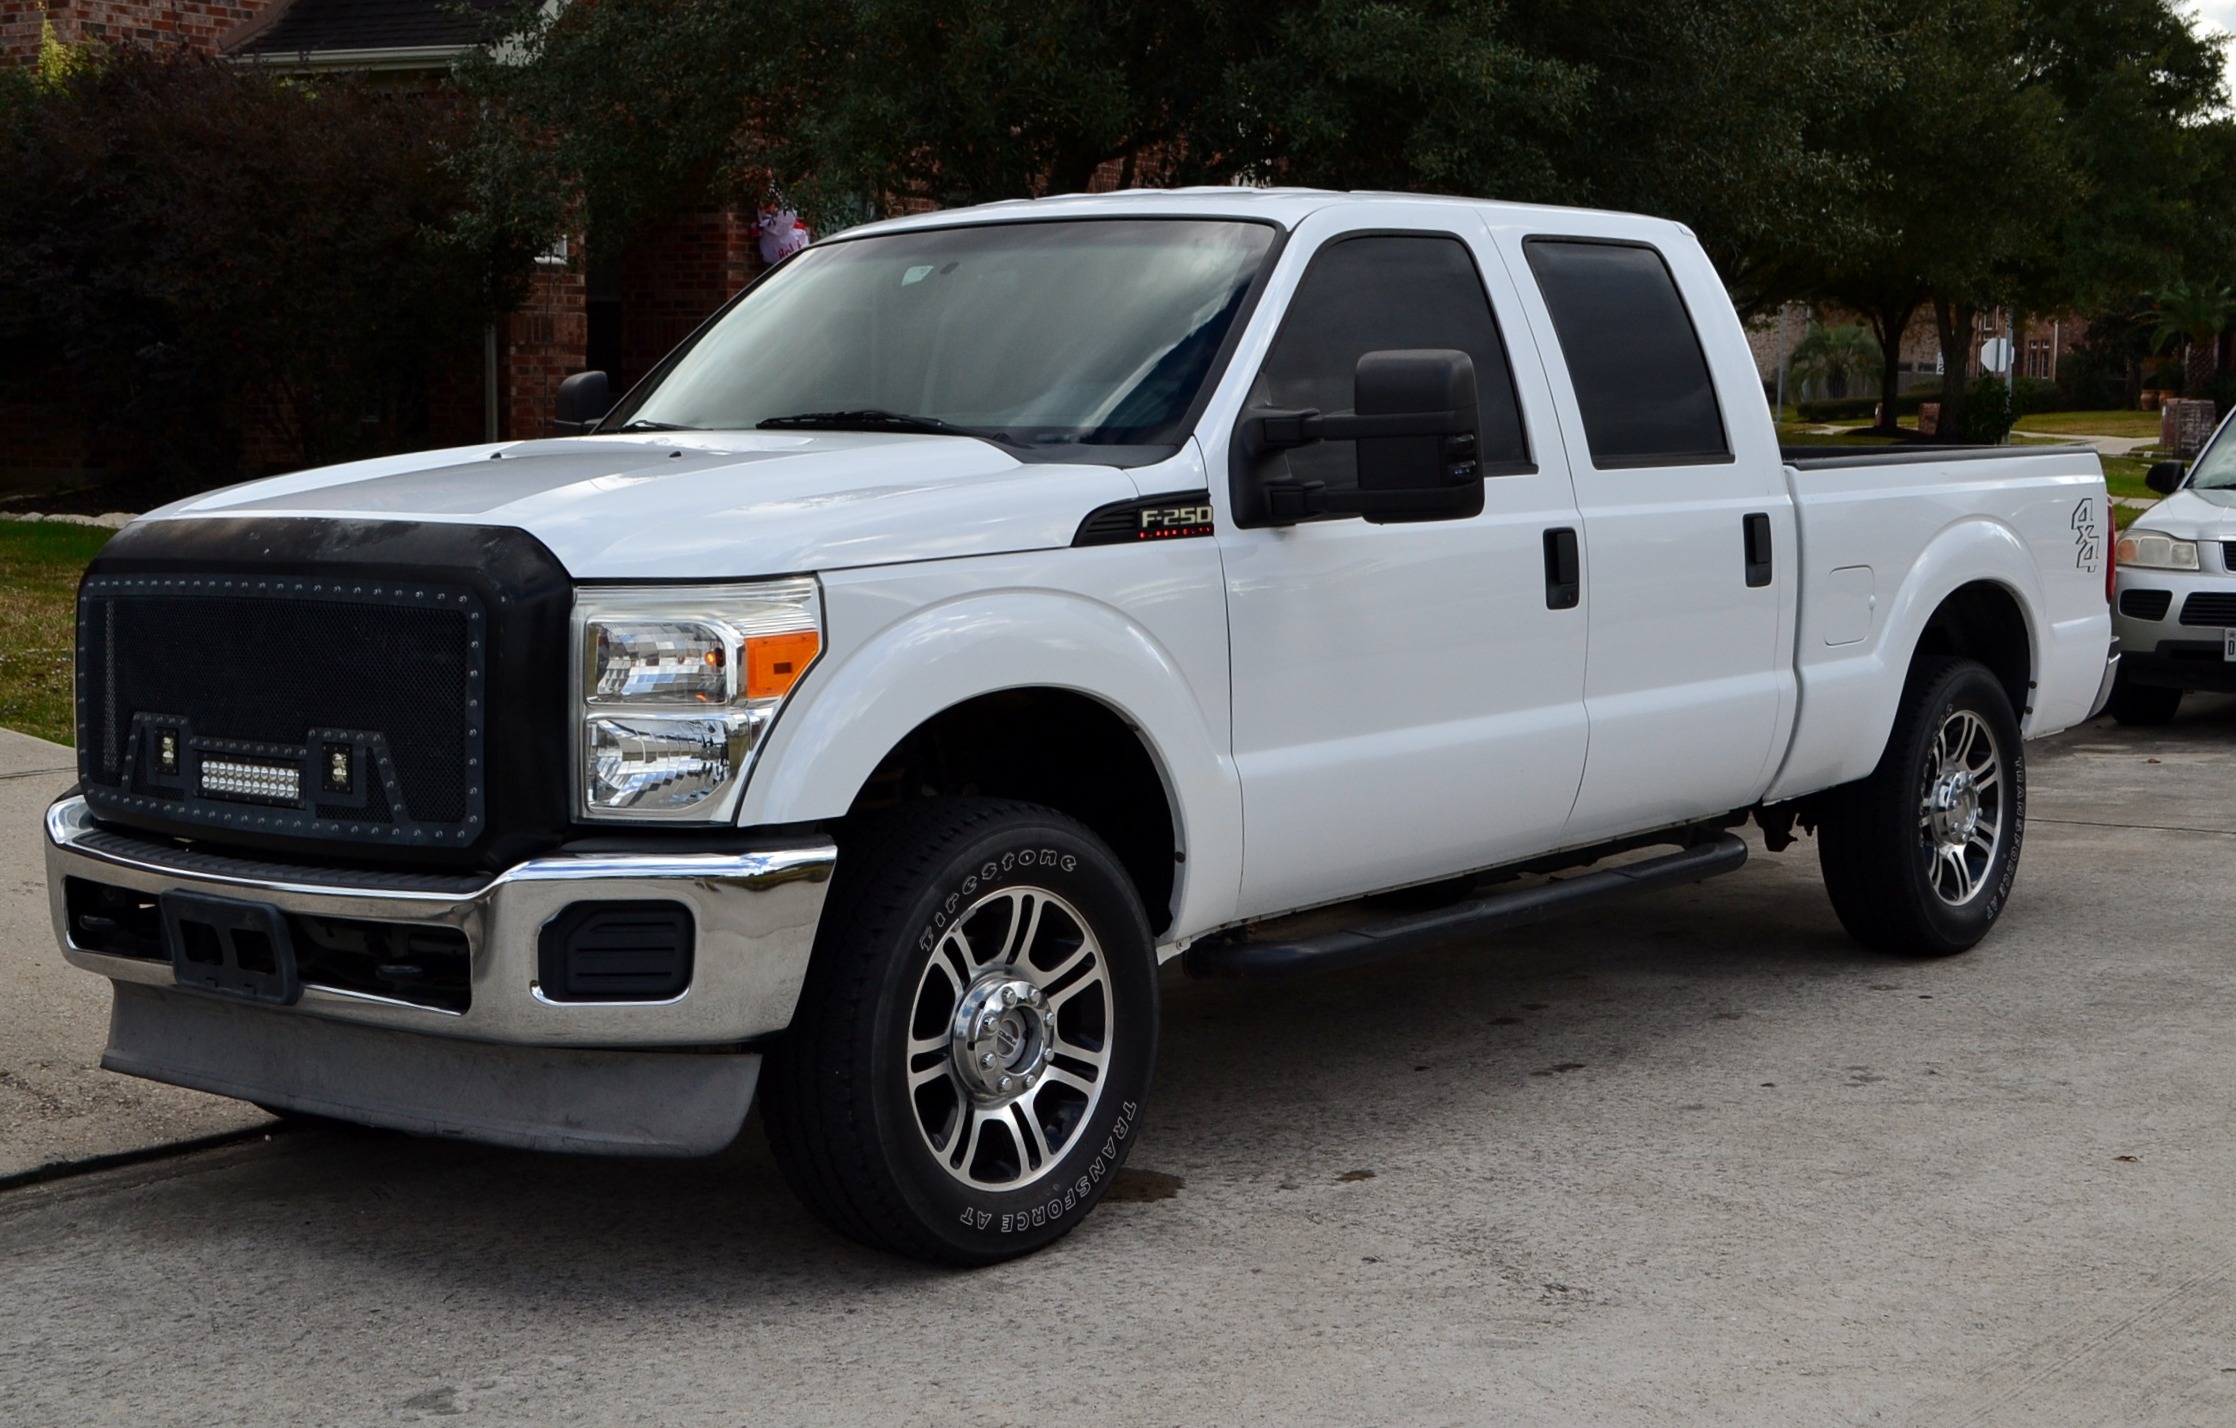 2011 FORD F-250 XL Crewcab 4X4 – Daily Autos 2011 Ford F250 6.2 L Towing Capacity